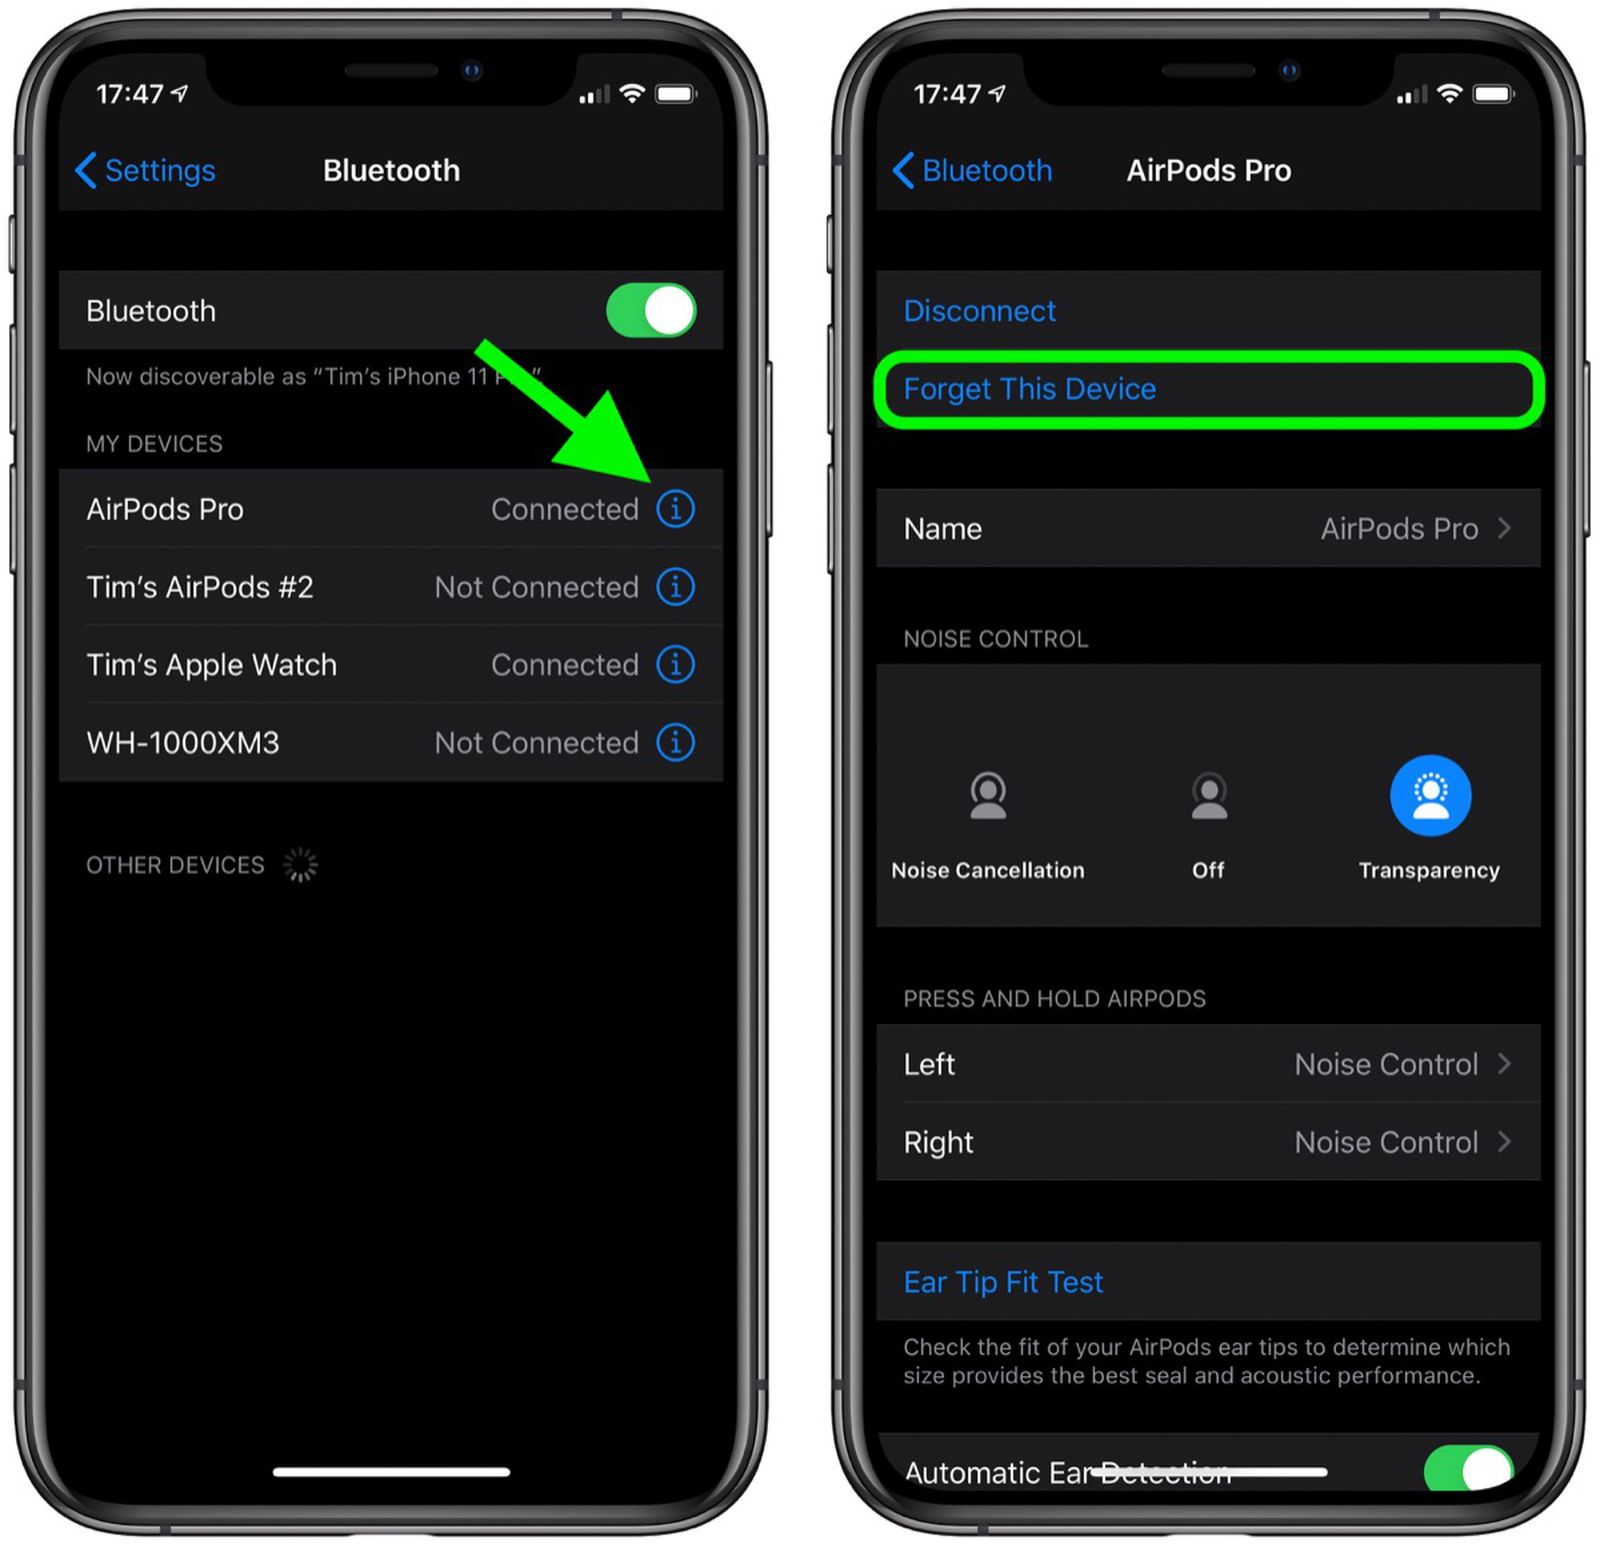 Forhandle udslæt Gå vandreture How to Reset AirPods and AirPods Pro - MacRumors